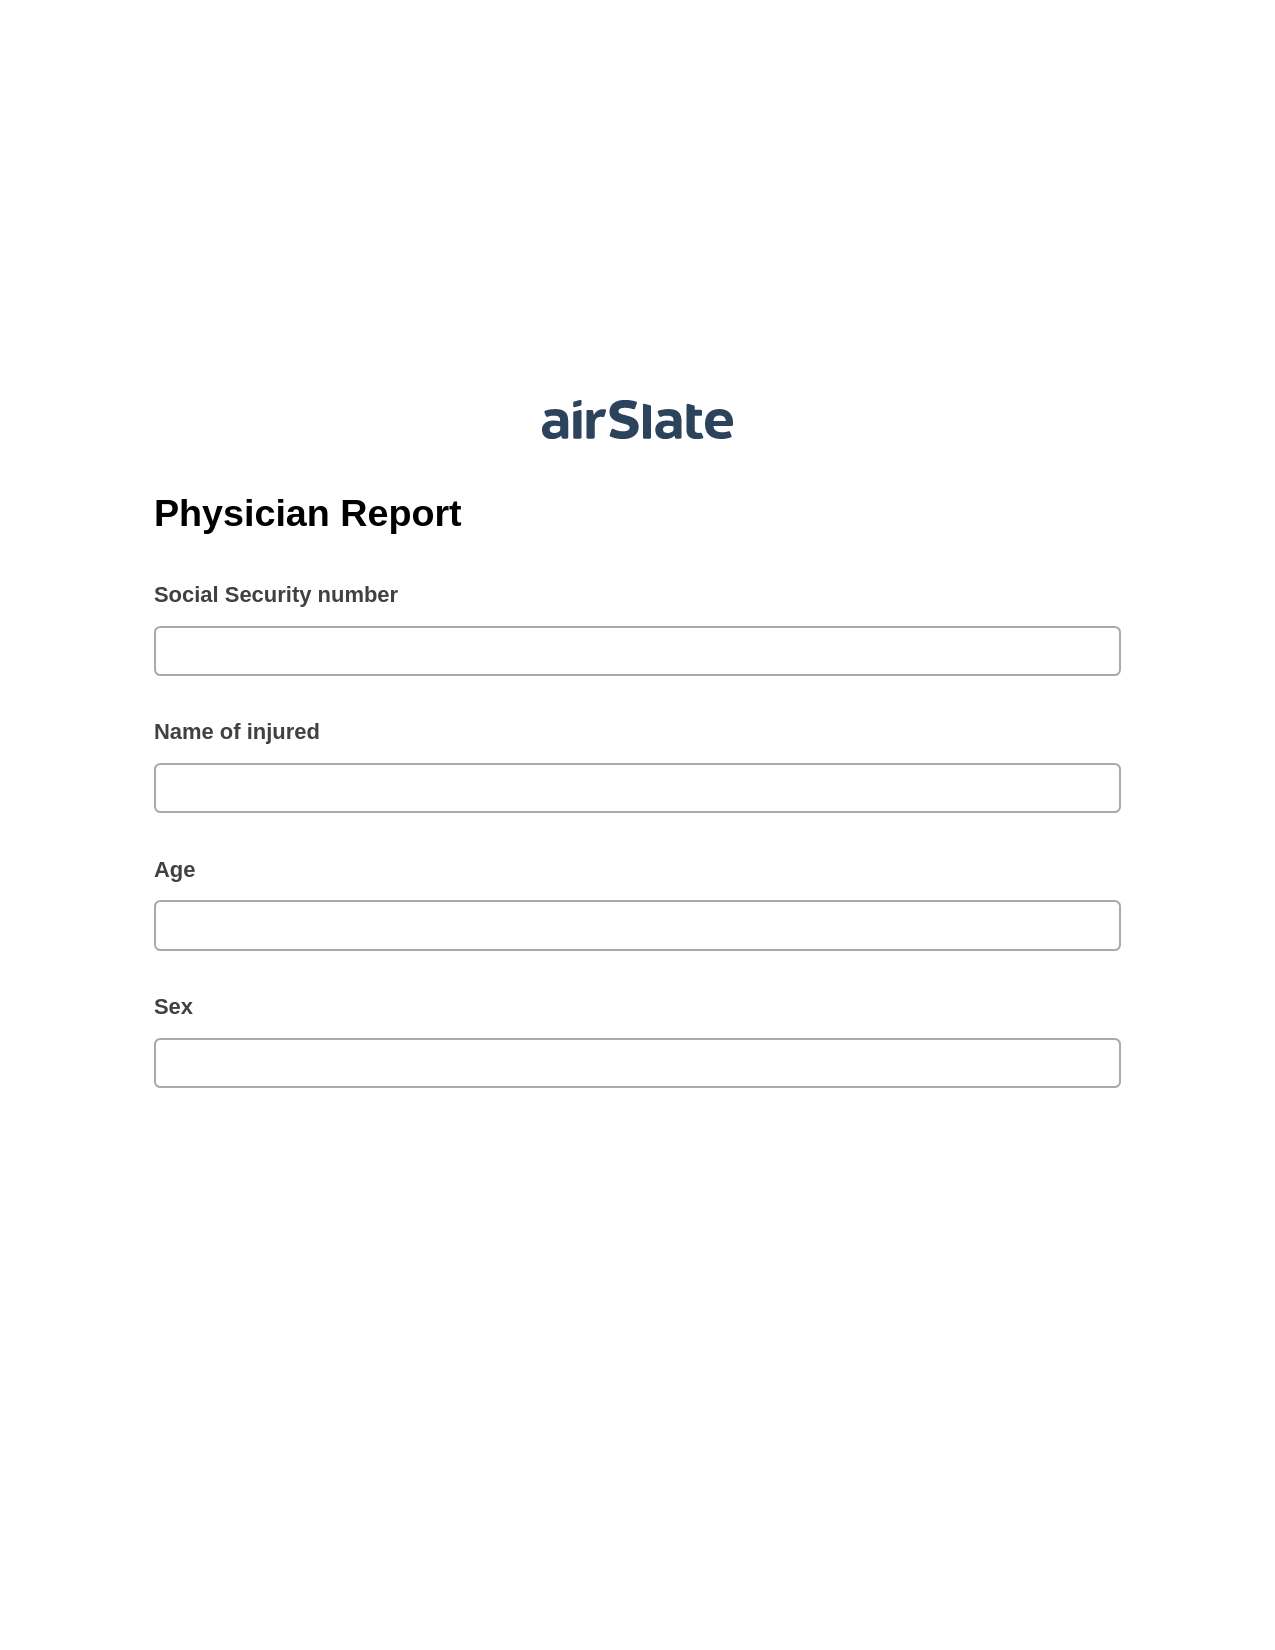 Multirole Physician Report Pre-fill from Google Sheets Bot, Create NetSuite Record bot, Archive to Dropbox Bot